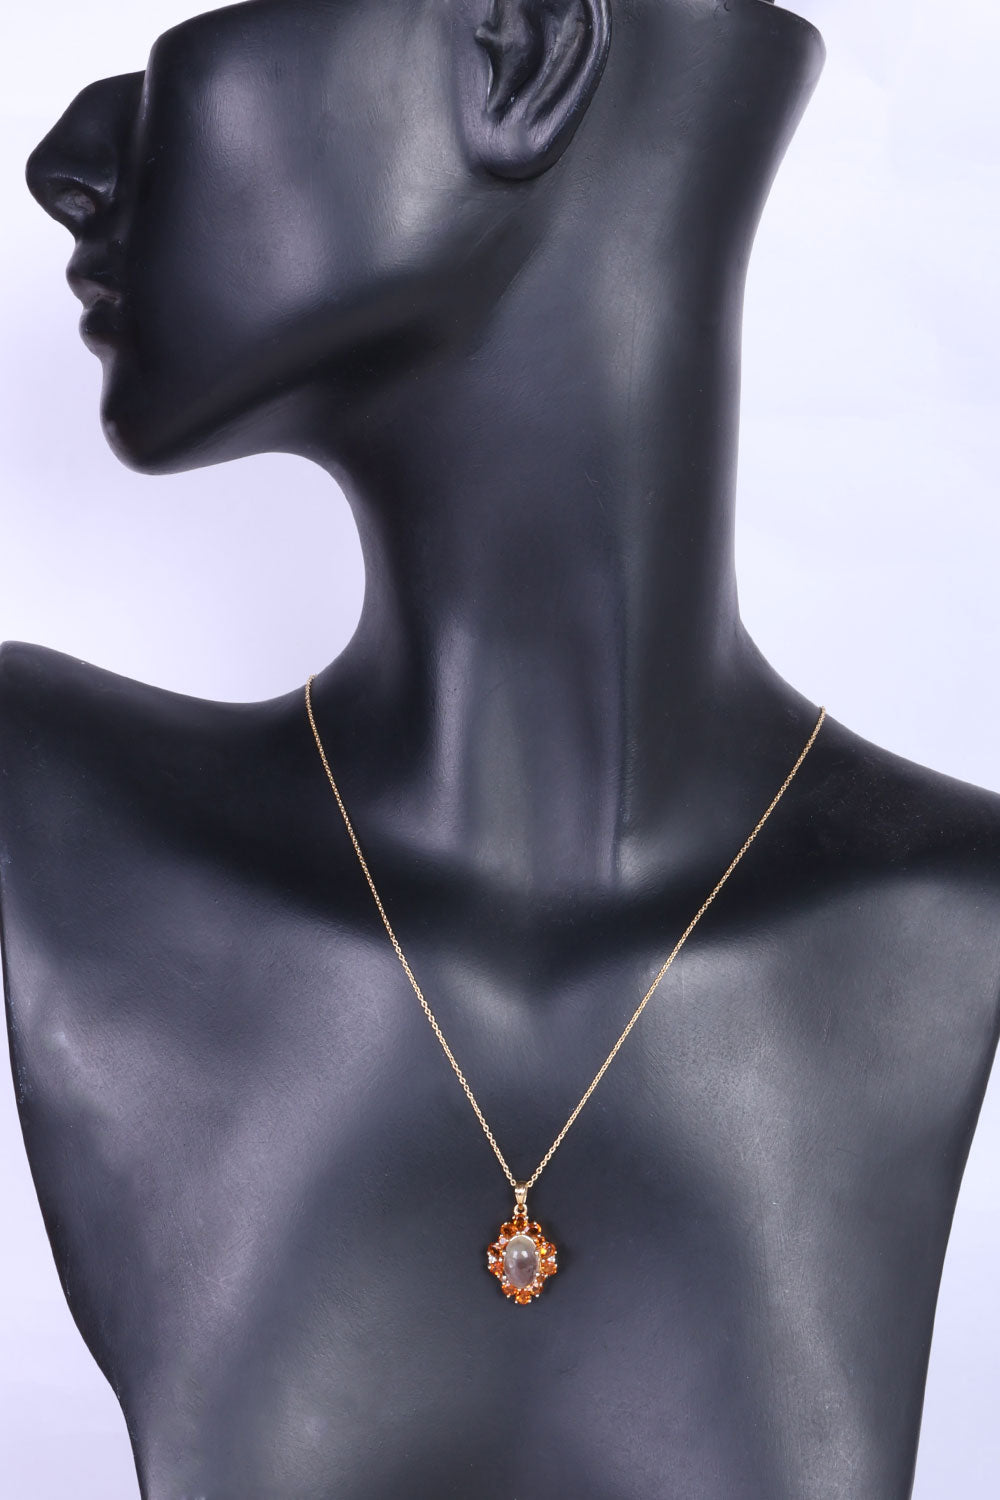 Ethiopian And Madeira Citrine Sterling Silver Necklace Pendant Chain - Avishya